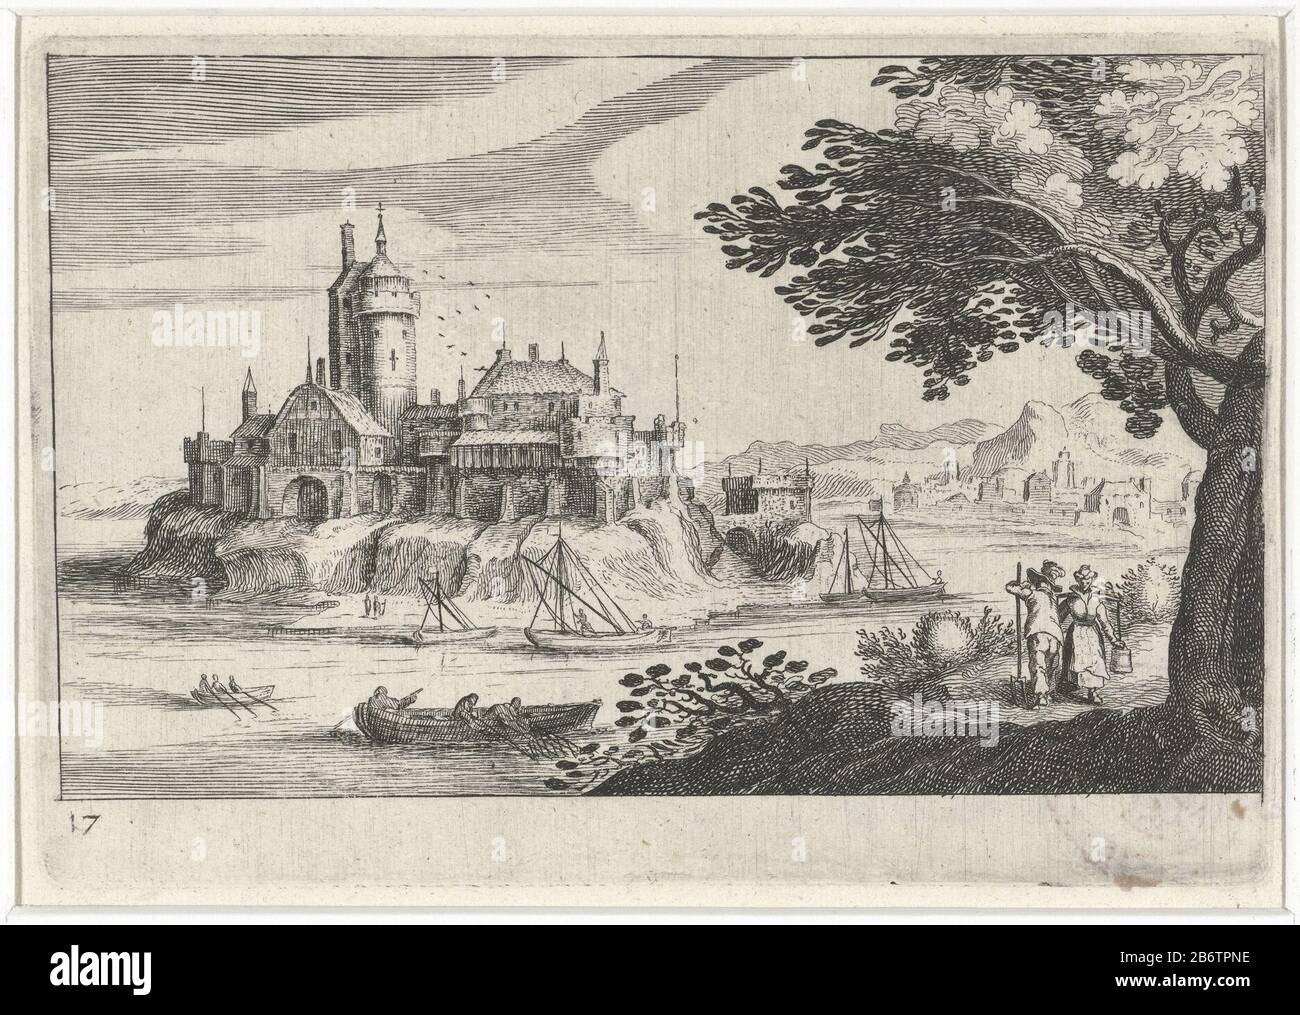 Heuvellandschap met een kasteel op een eiland Zuid-Europese landschappen (serietitel) Topographia variarum regionum (serietitel) Several boats in the water around a castle. Right, a man and a milkmaid at a boom. Manufacturer : printmaker Simon Frisiusprentmaker: Hendrick Hondius (I) (attributed to) design by: Matthijs Bril Publisher: Hendrick Hondius (I) provider of privilege unknown place manufacture: printmaker: Northern Netherlands Print Author: Den Haag Publisher: Den Haag Date: 1611 Physical characteristics: etching material: paper Technique: etching dimensions: plate edge: h 107 mm × W 1 Stock Photo